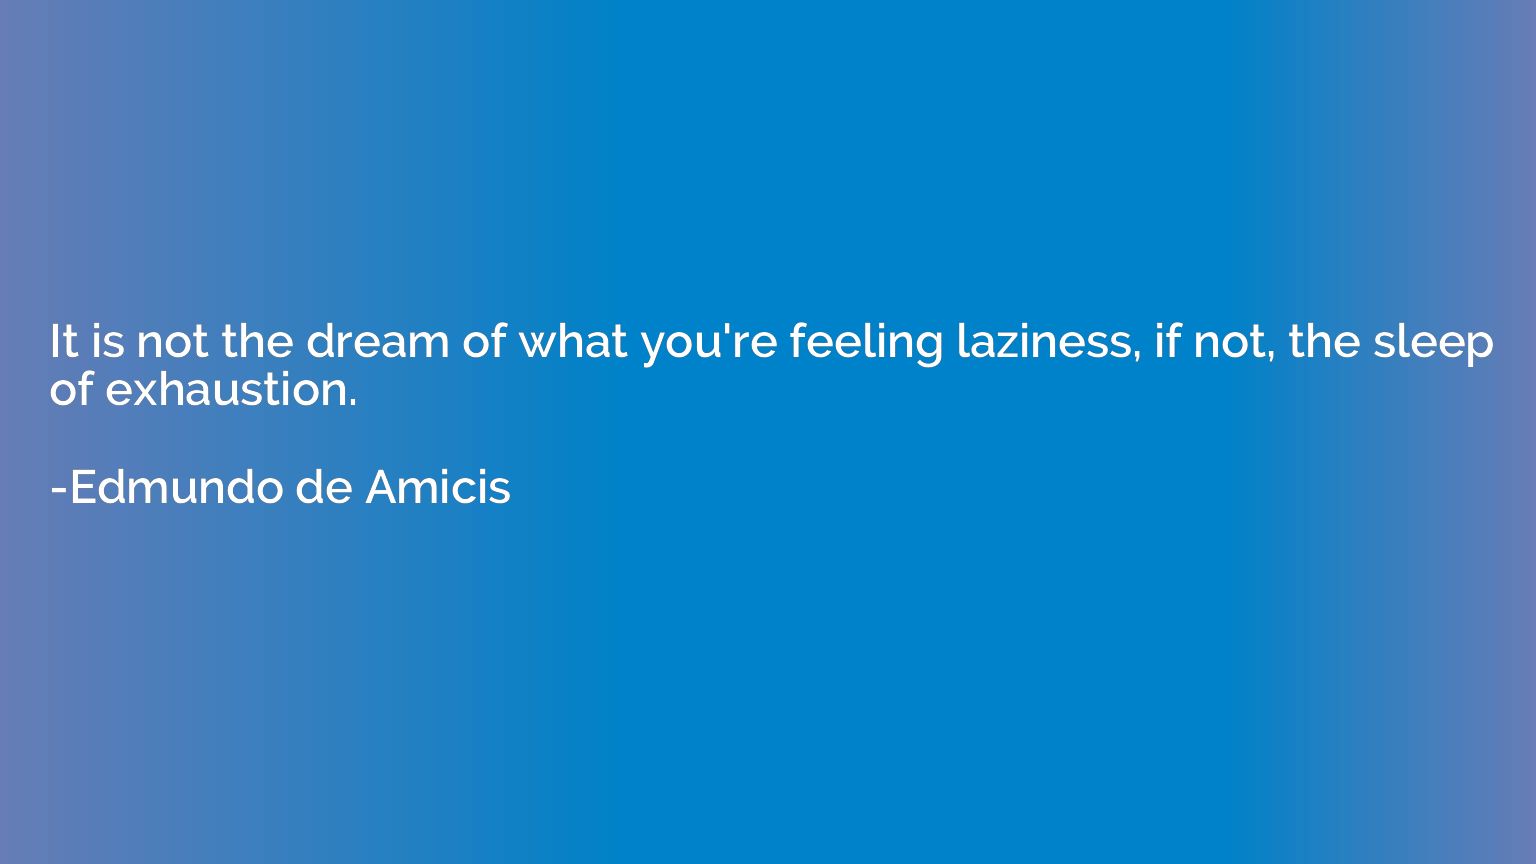 It is not the dream of what you're feeling laziness, if not,